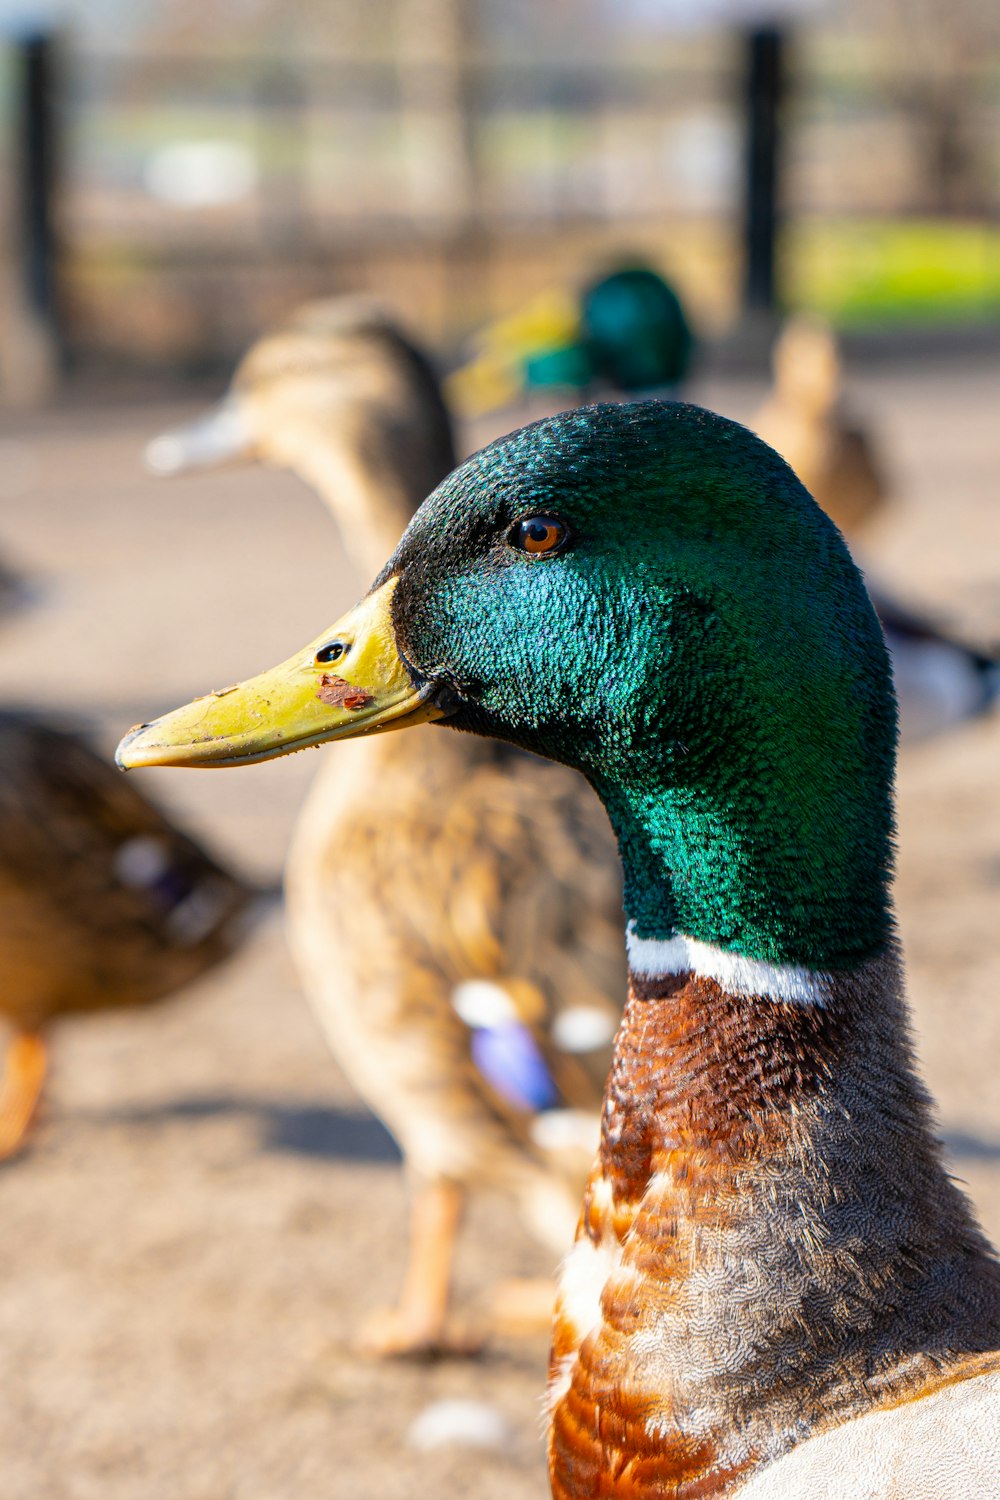 a close up of a duck with other ducks in the background